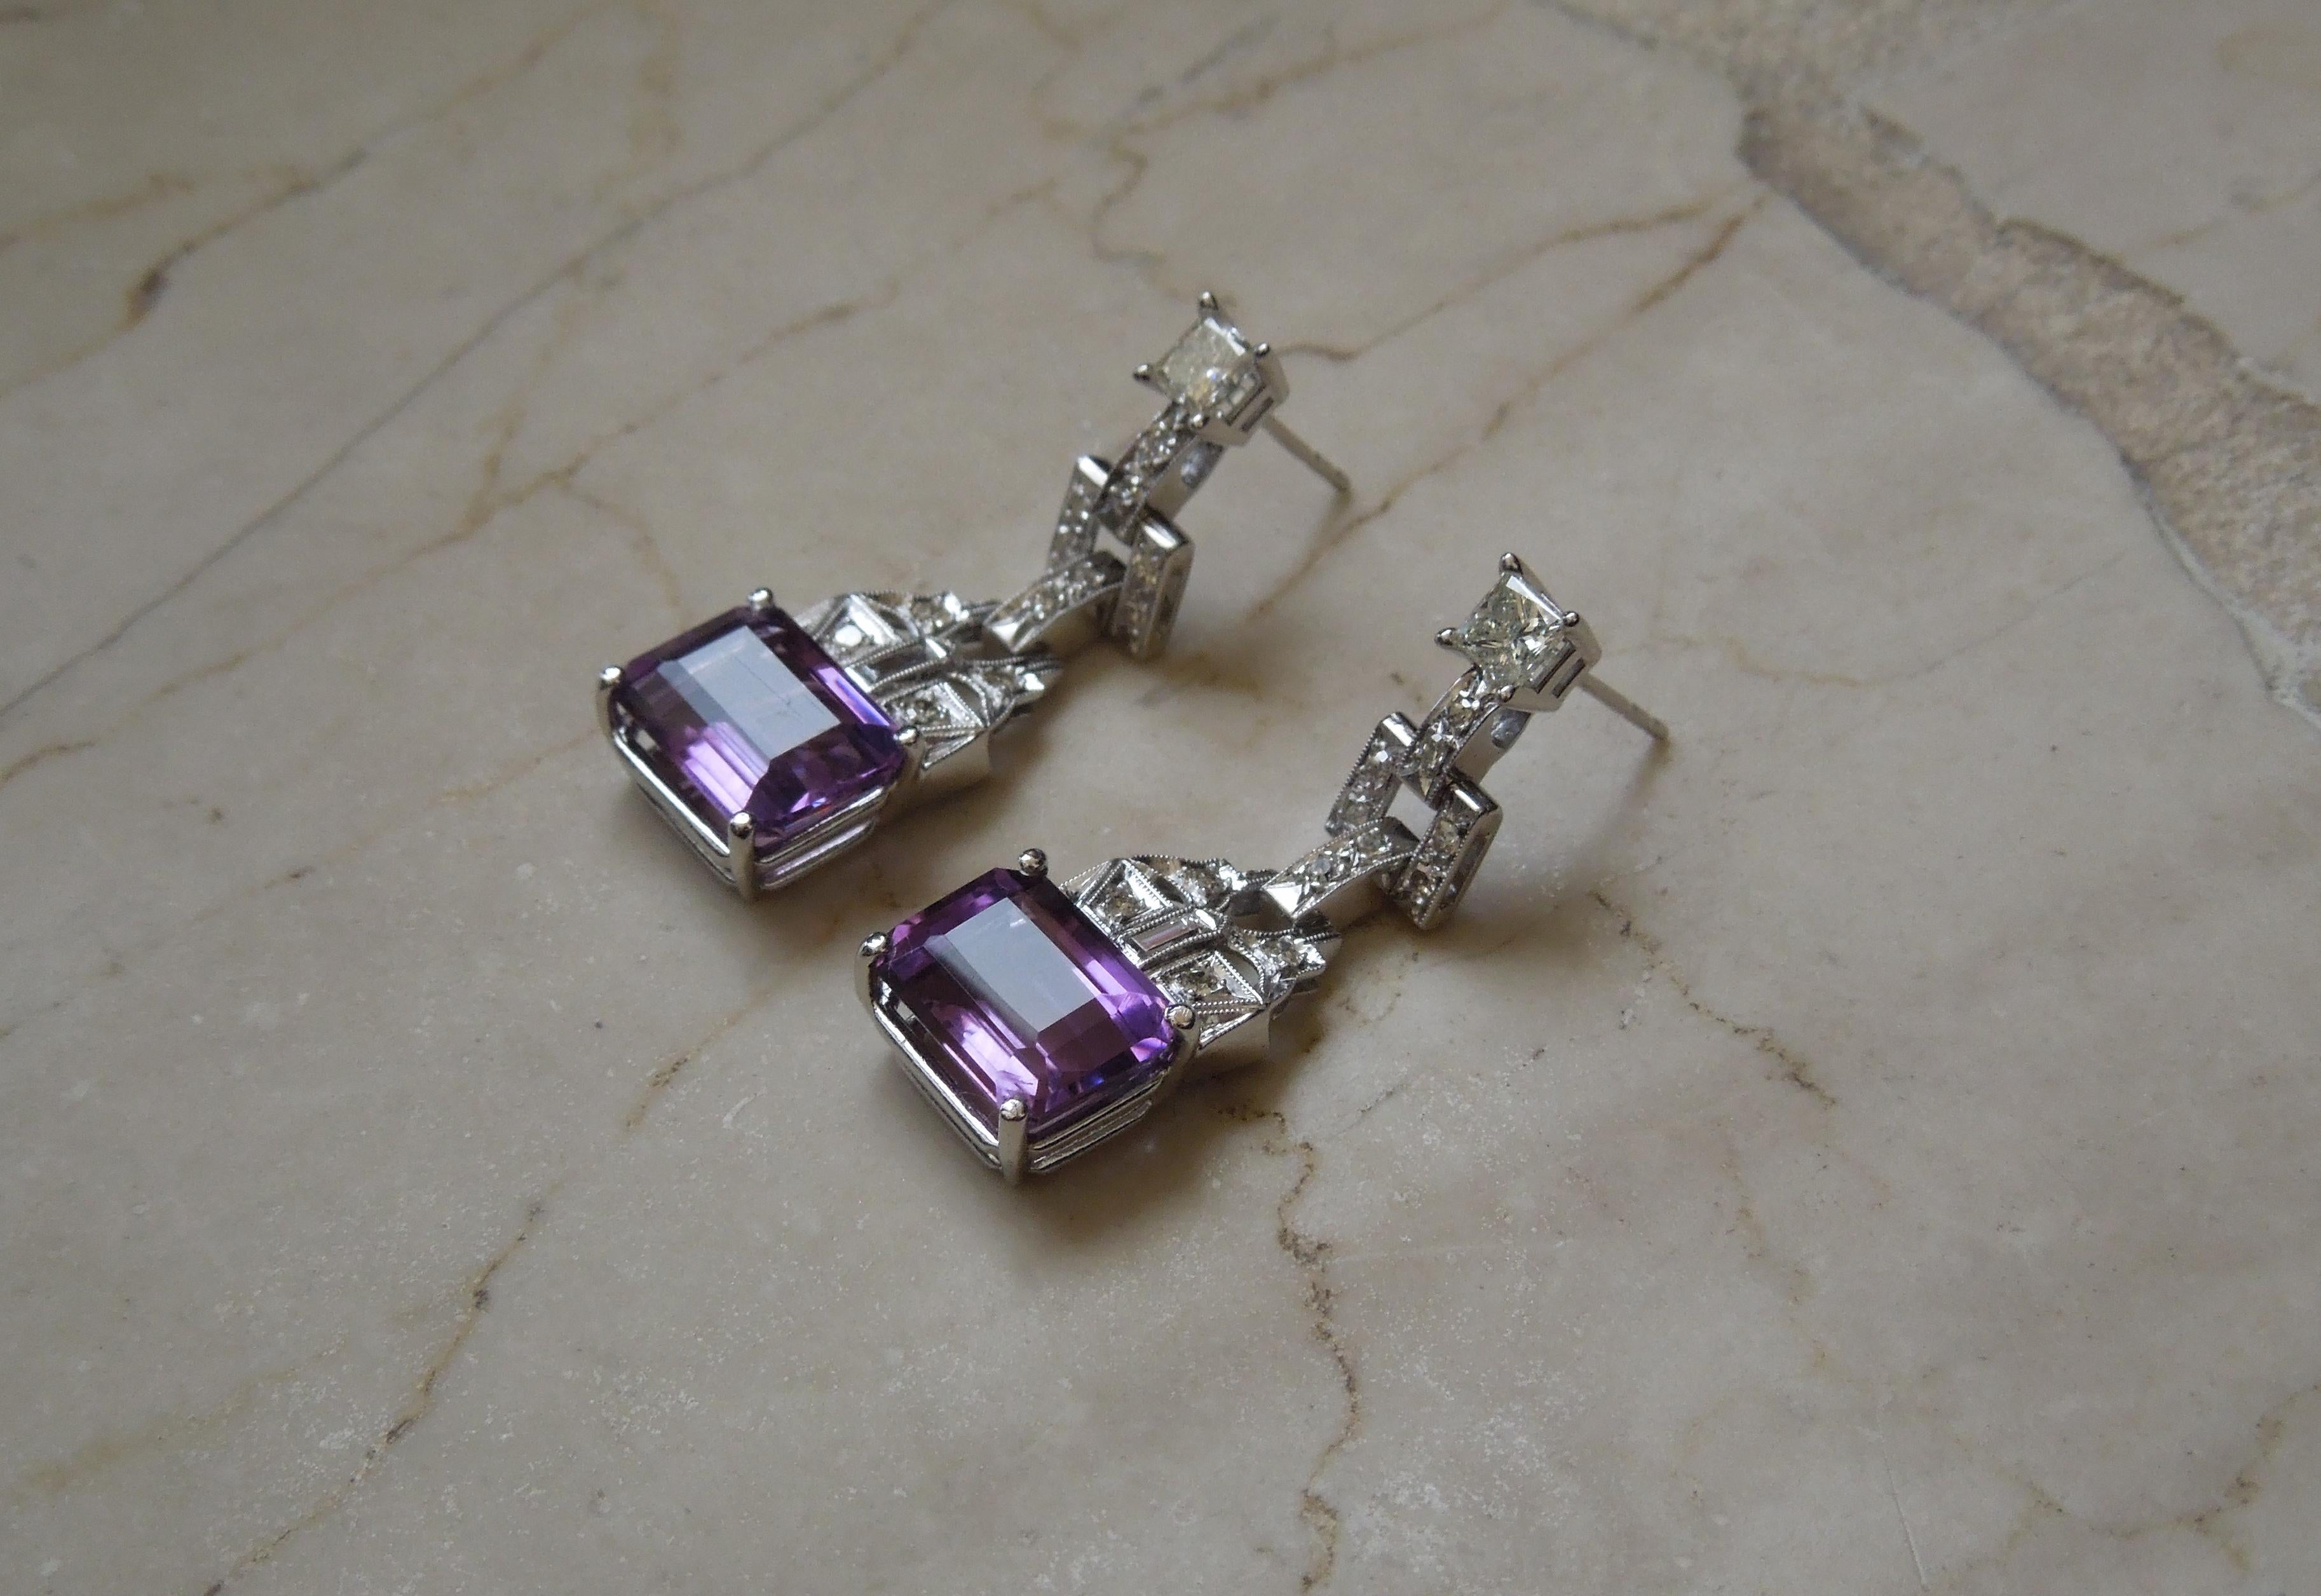 Constructed of a combination of 14 Karat White Gold & Platinum - Featuring 2 Focal Emerald cut Intense Purple Amethysts totaling approximately 6.59 carats measuring 102mm-10.8mm in length x 7.5mm in width, each secured in a 4-Prong Setting.  
Each